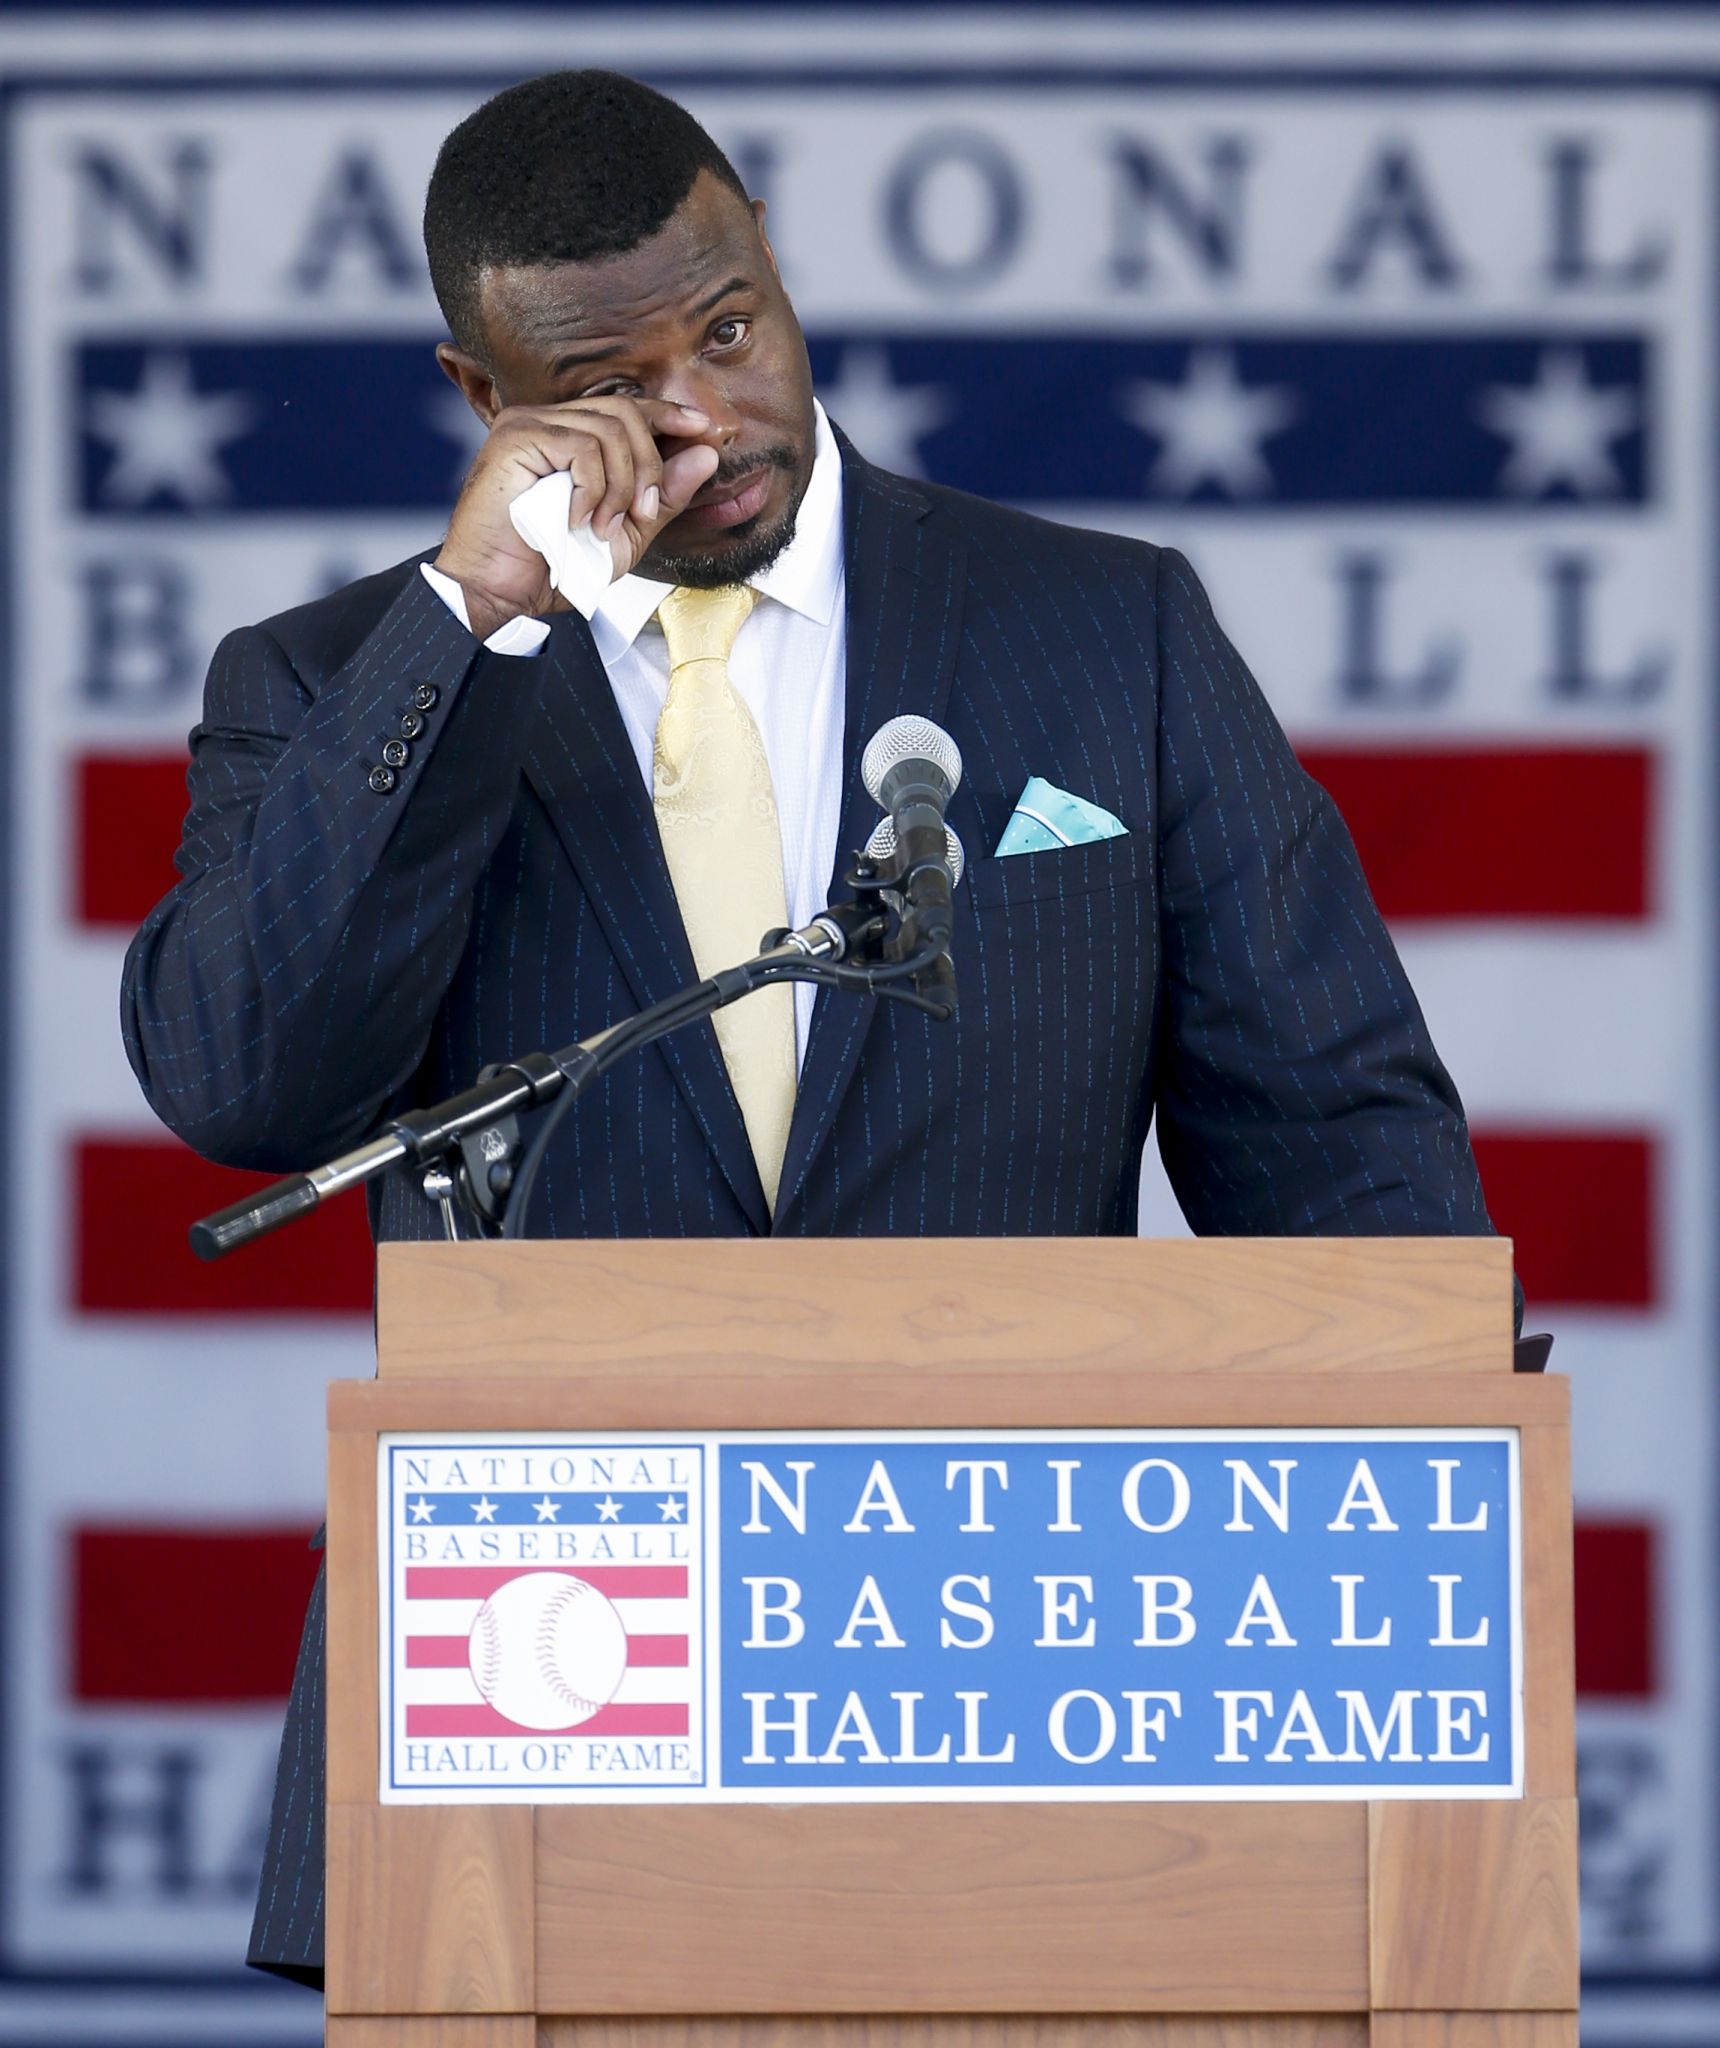 Ken Griffey Jr Wore an Amazing Suit During Hall of Fame Induction